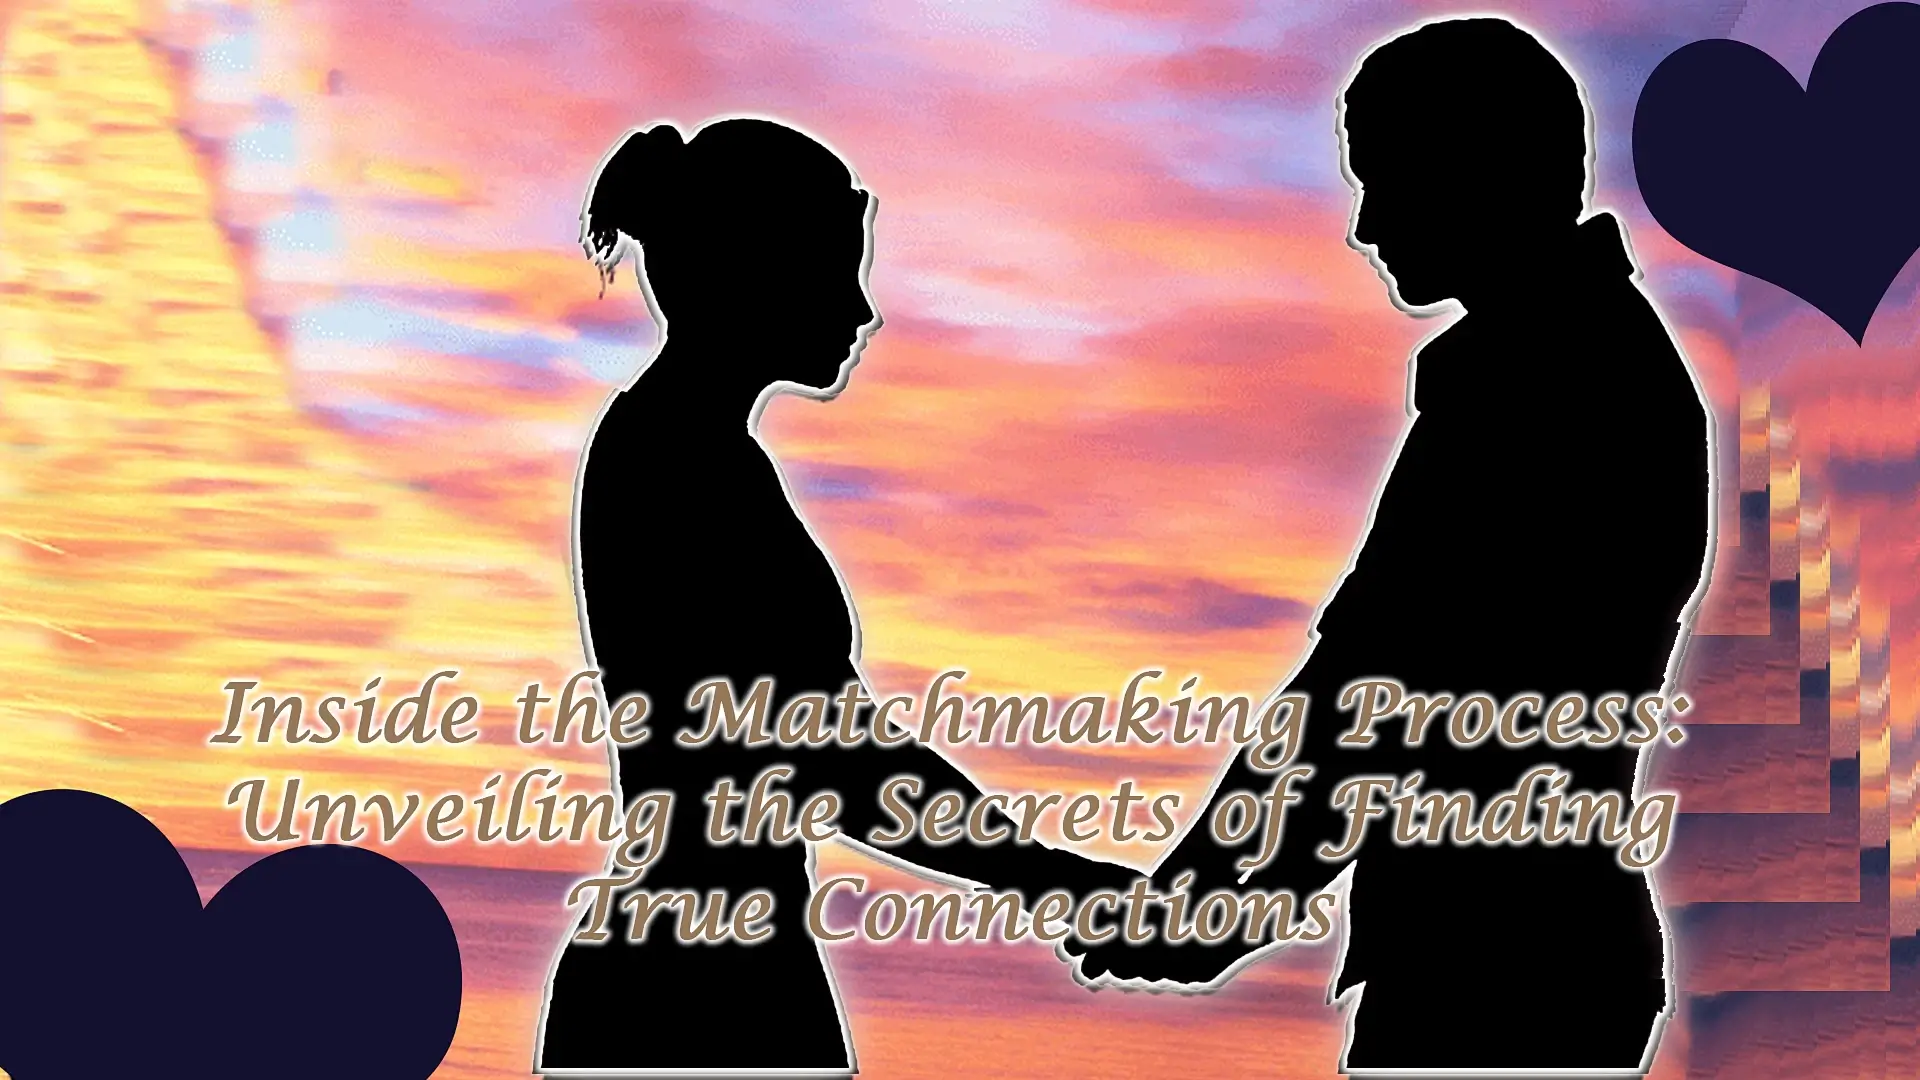 Inside the Matchmaking Process: Unveiling the Secrets of Finding True Connections